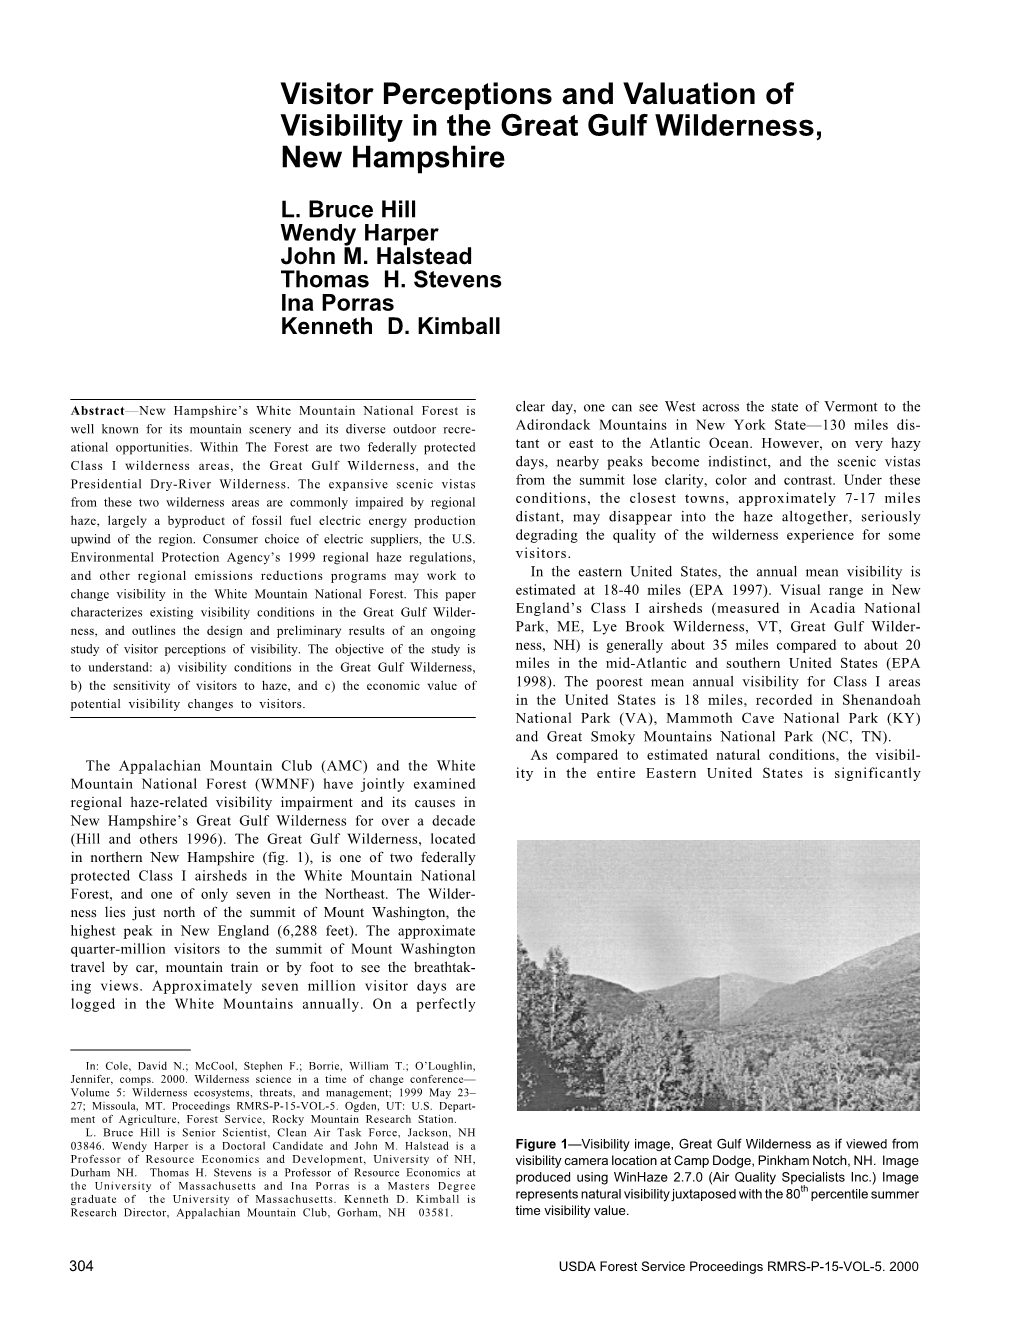 Wilderness Science in a Time of Change Conference— Volume 5: Wilderness Ecosystems, Threats, and Management; 1999 May 23– 27; Missoula, MT